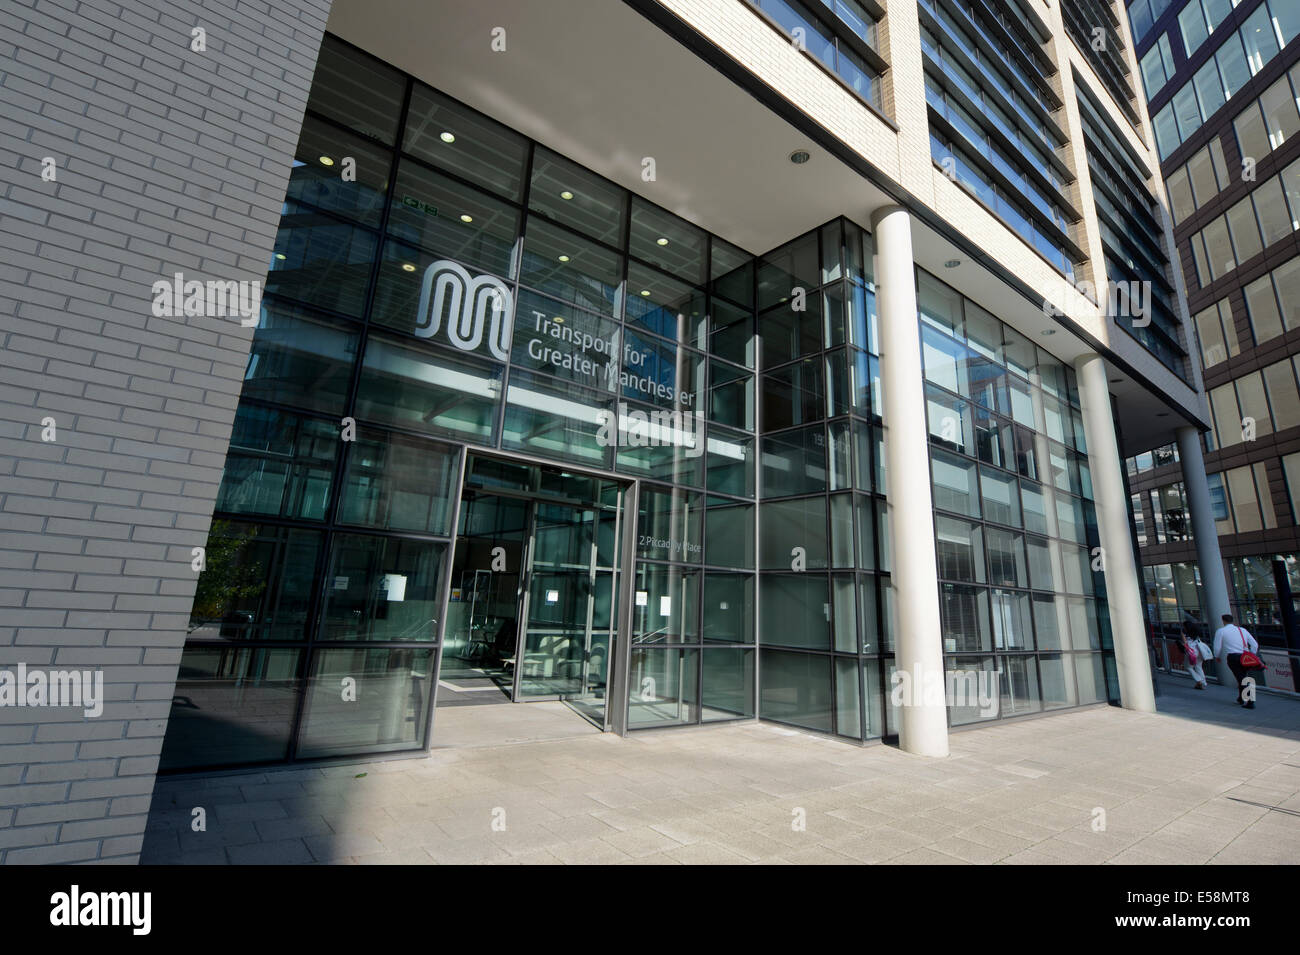 The entrance to the headquarters offices for Transport for Greater Manchester (TfGM), formerly GMPTE in Piccadilly, Manchester. Stock Photo